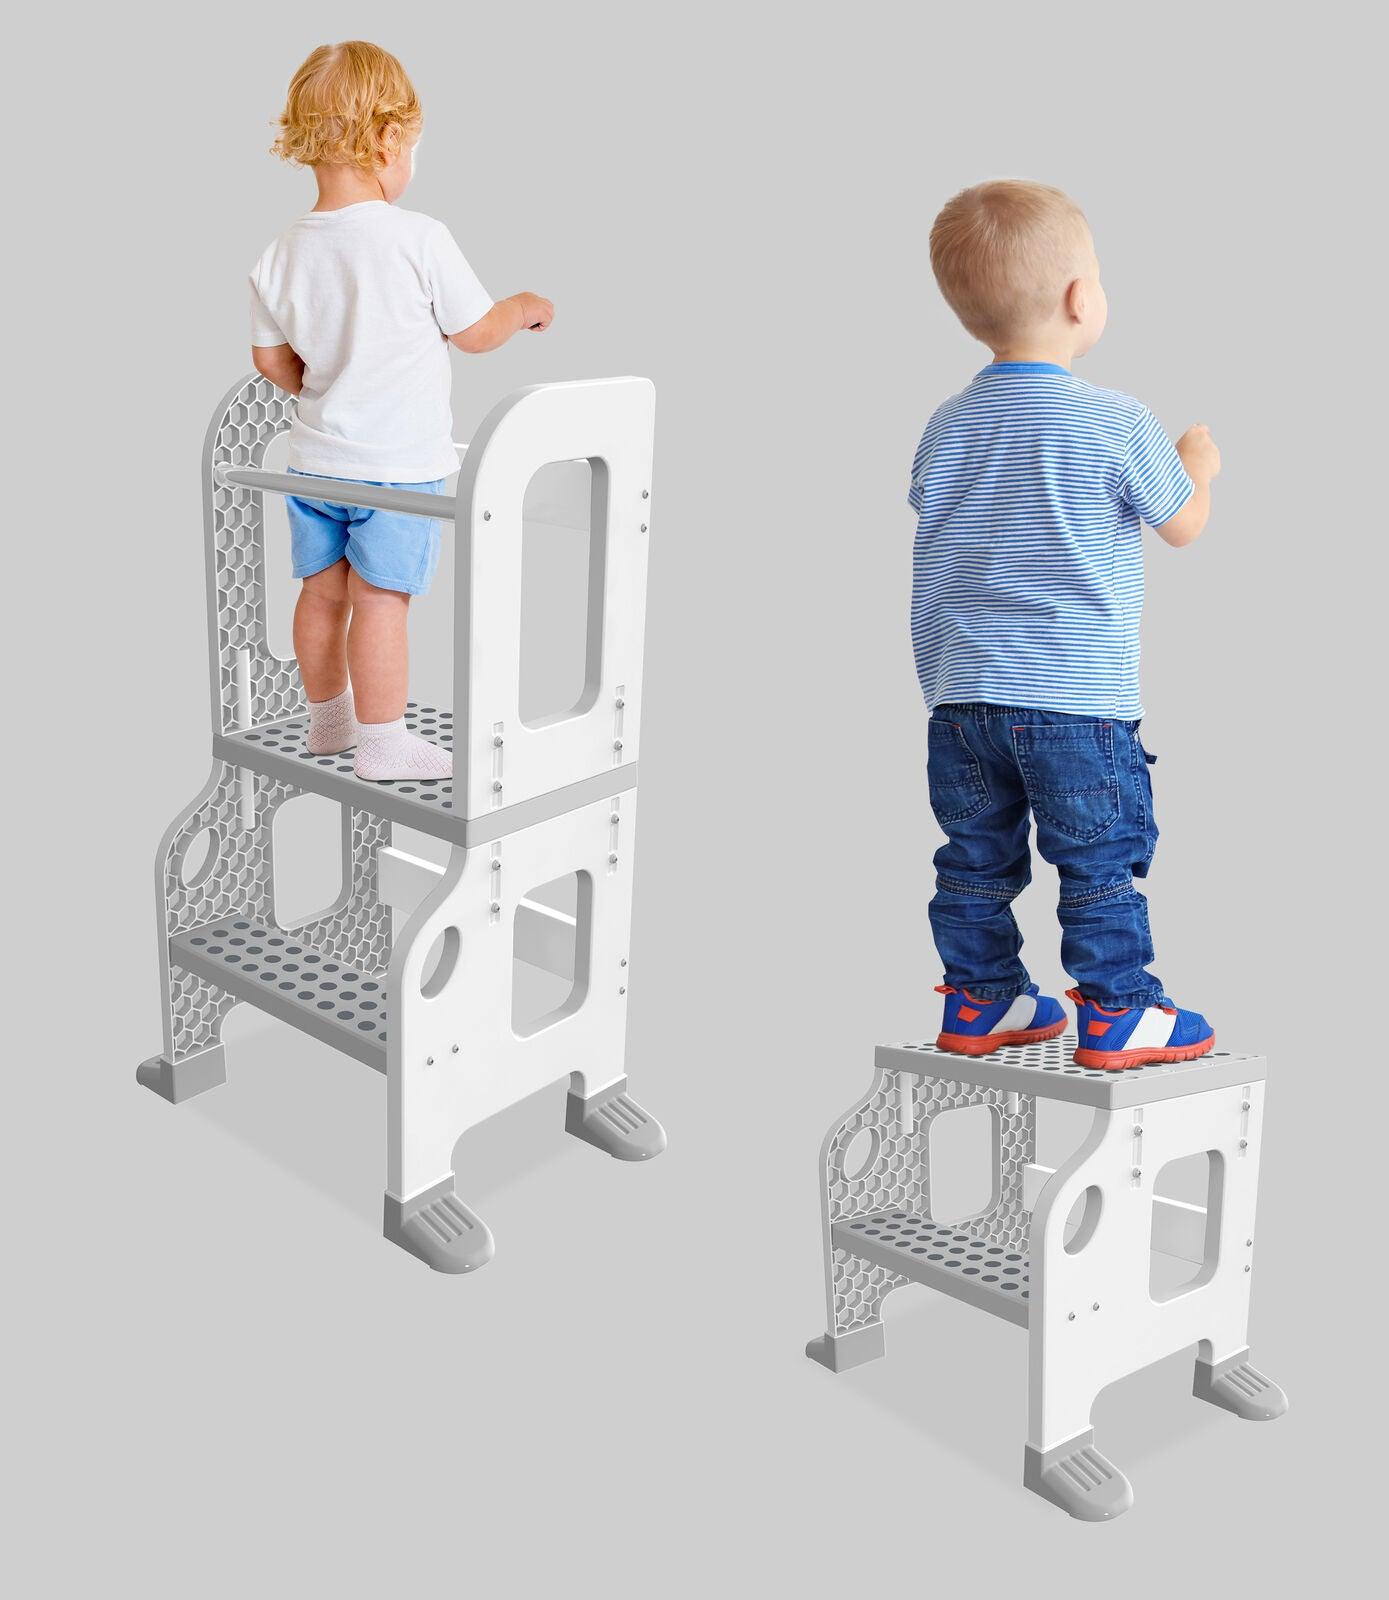 Kitchen Buddy Learning Tower 2-in-1 Stool for Ages 1-3 - Etyn Online {{ product_tag }}